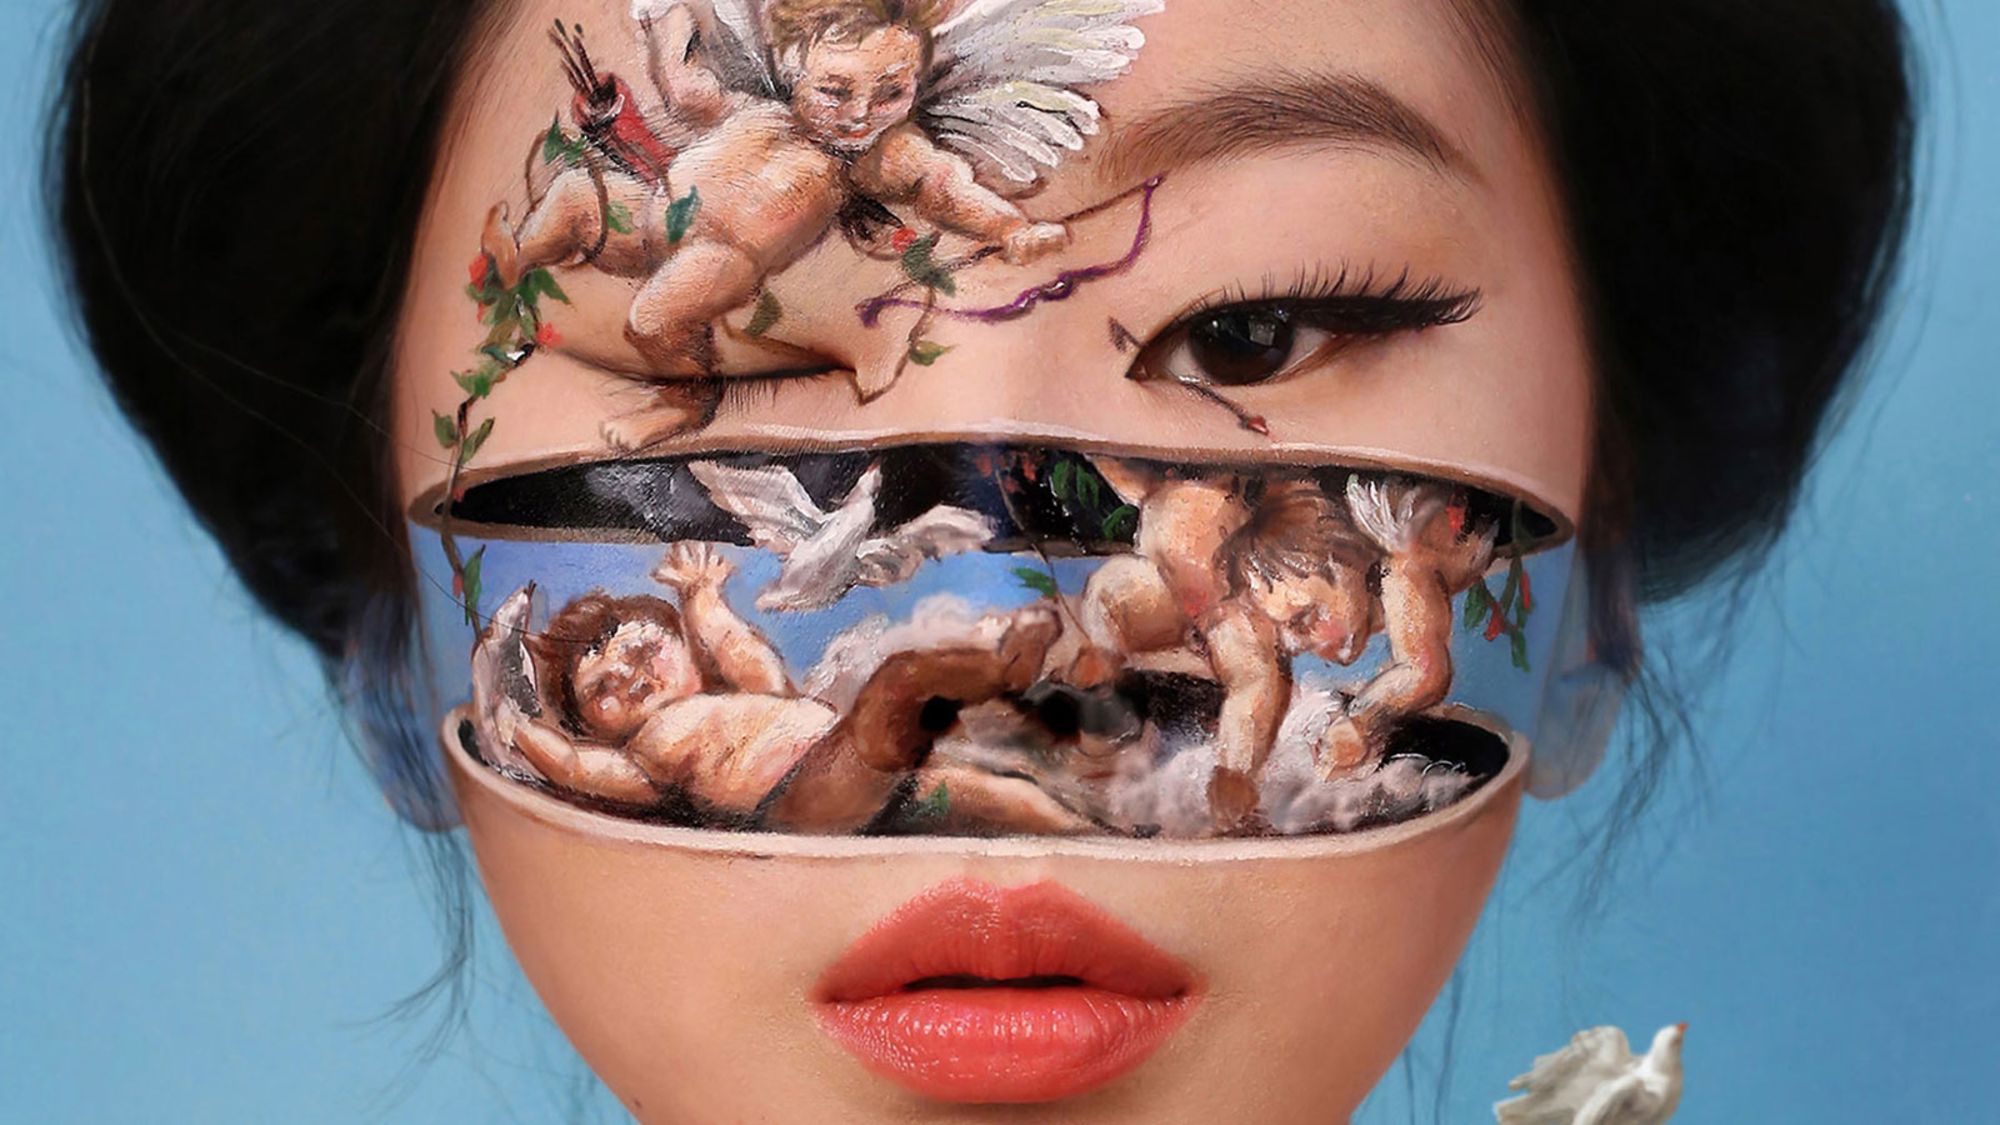 The artist uses her face to paint captivating and intricate scenes that often trick the eye with 3D shading.